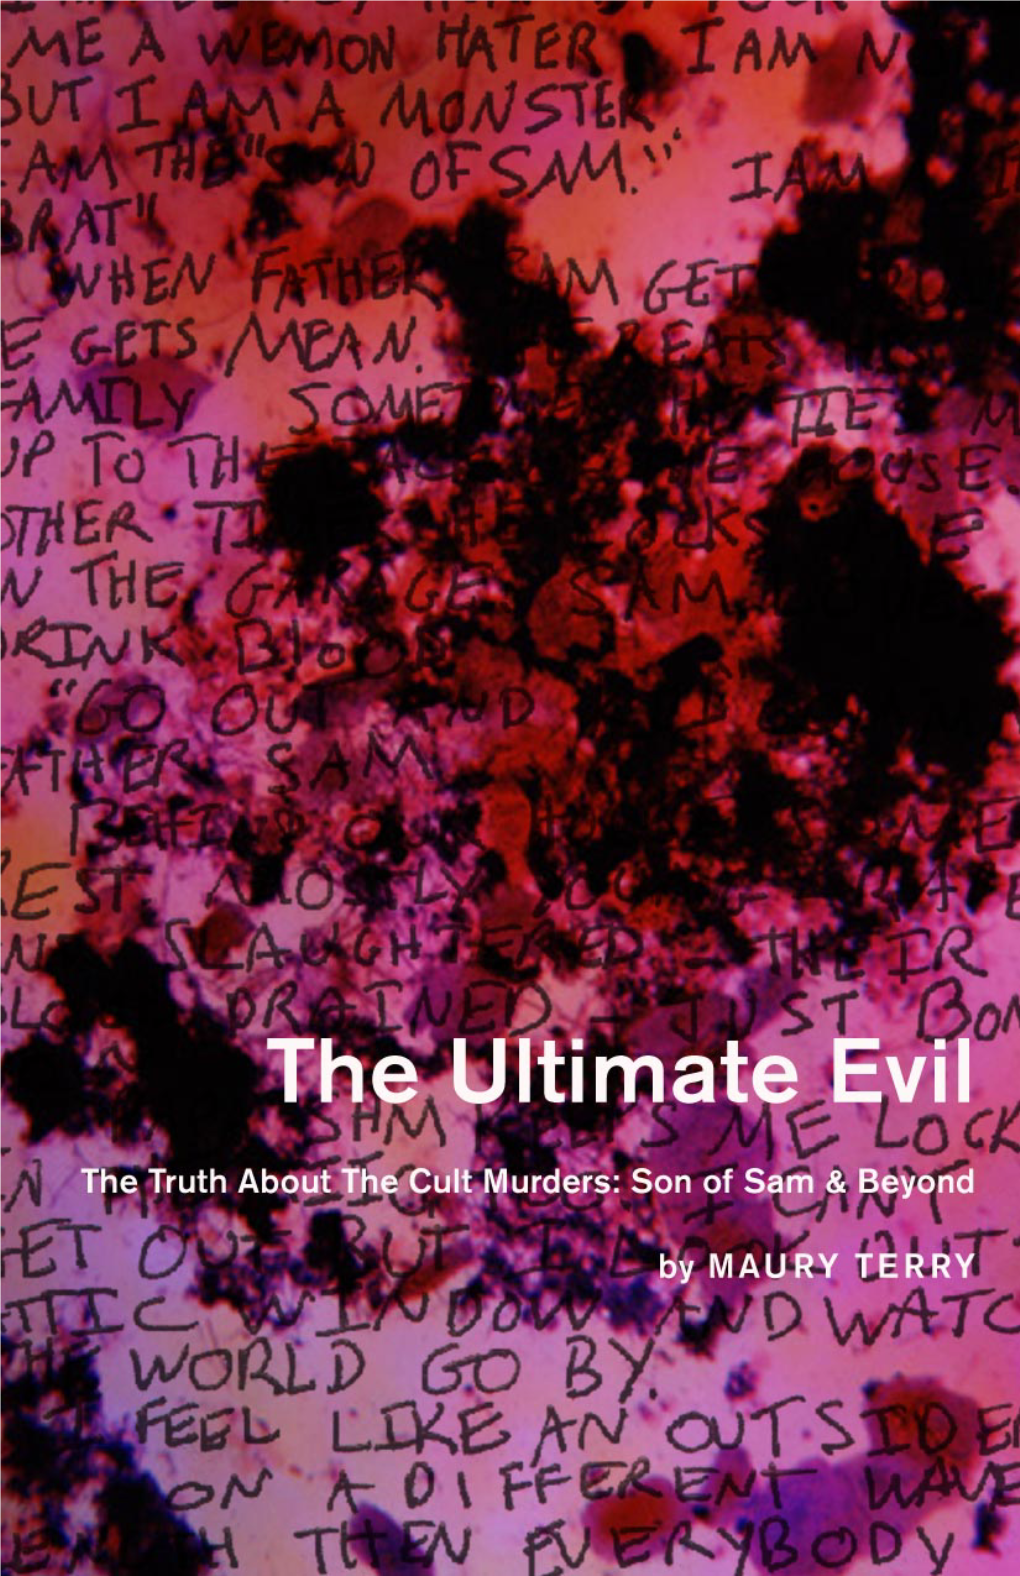 The Ultimate Evil the Ultimate Evil the Truth About the Cult Murders: Son of Sam & Beyond